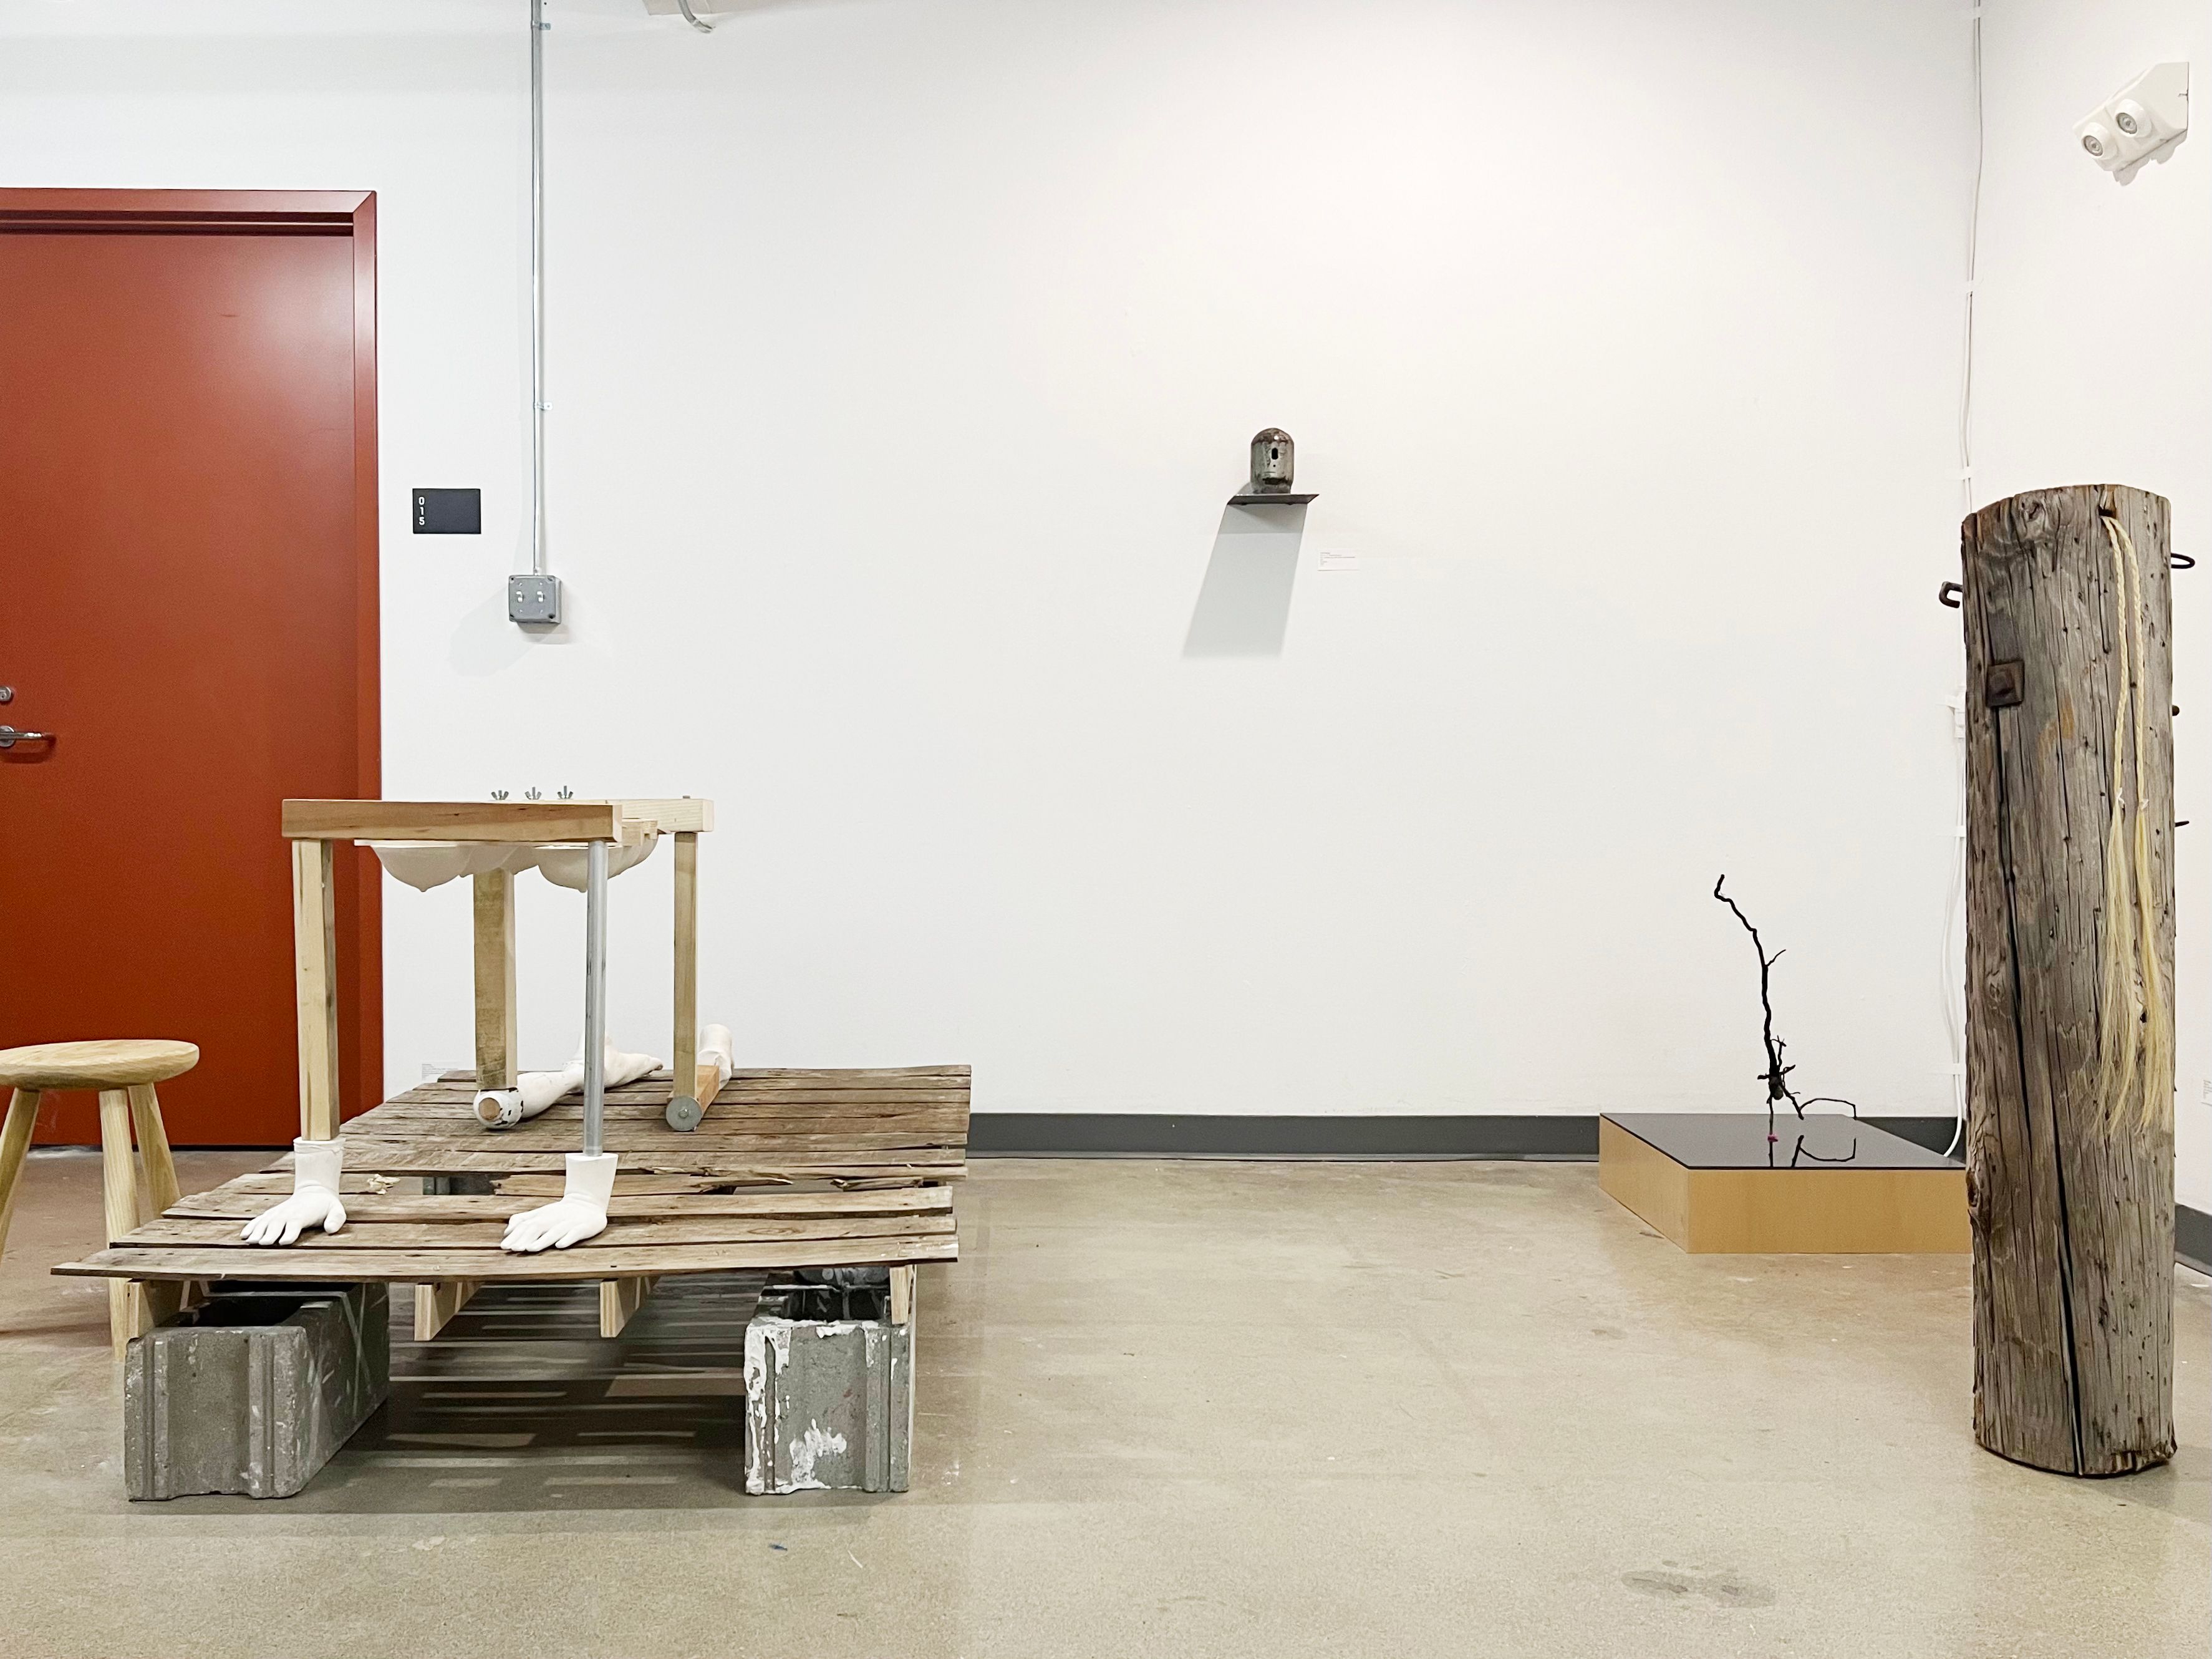 Installation view of a series of wooden, metal, and plaster sculptures.